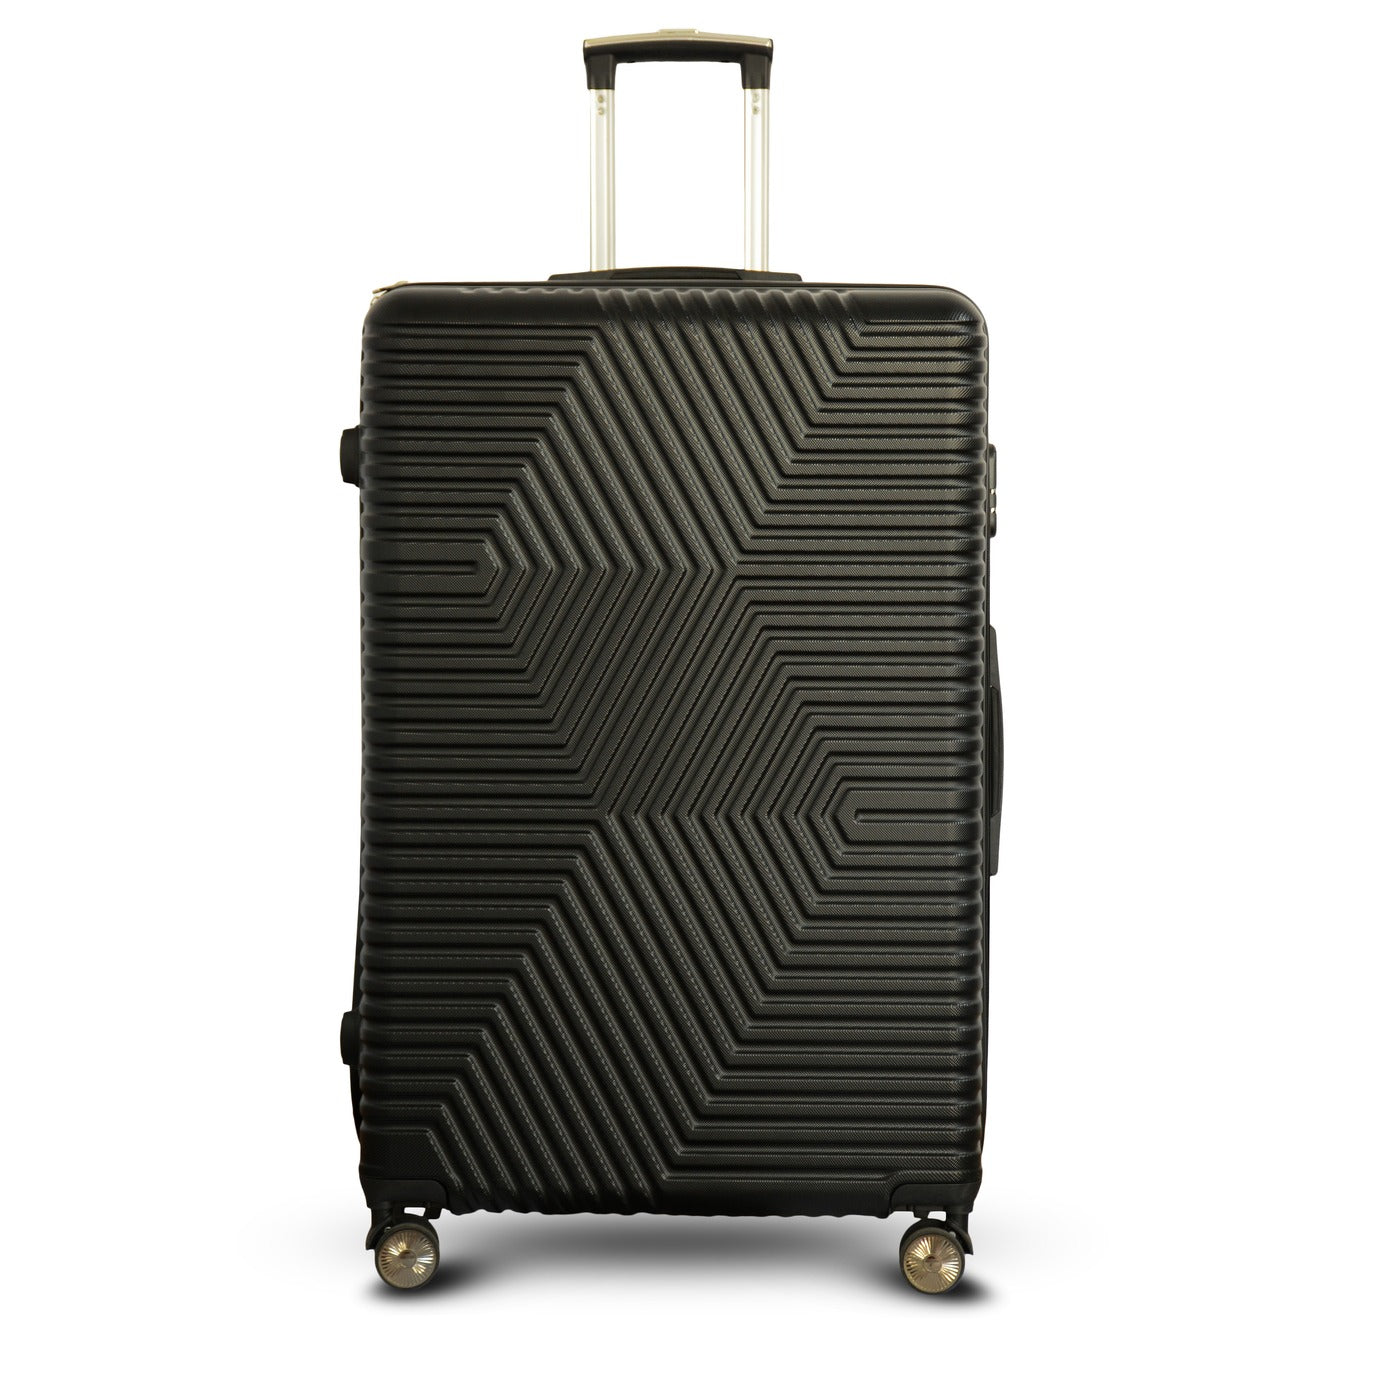 24" Zig Zag ABS Lightweight Luggage Bag With Double Spinner Wheel